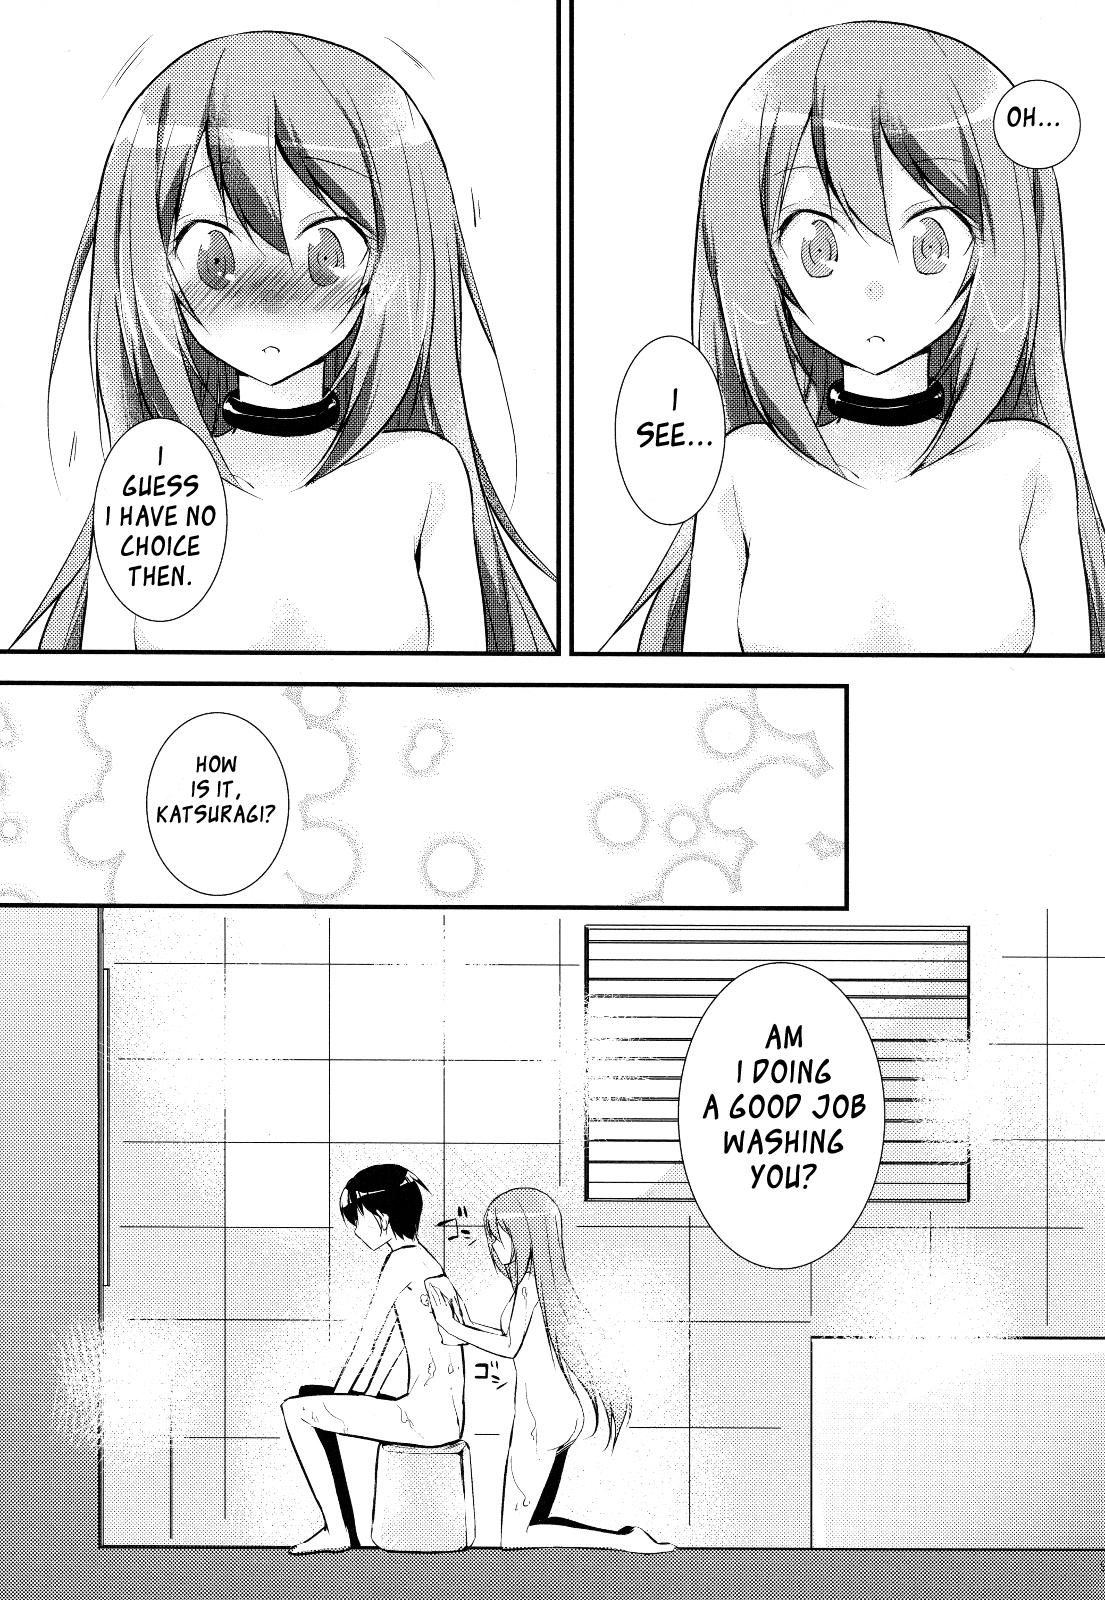 Best Blowjobs Kamisama no Hentai Play Nikkichou 4 | Kamisama's Hentai Play Diary 4 - The world god only knows Insertion - Page 8